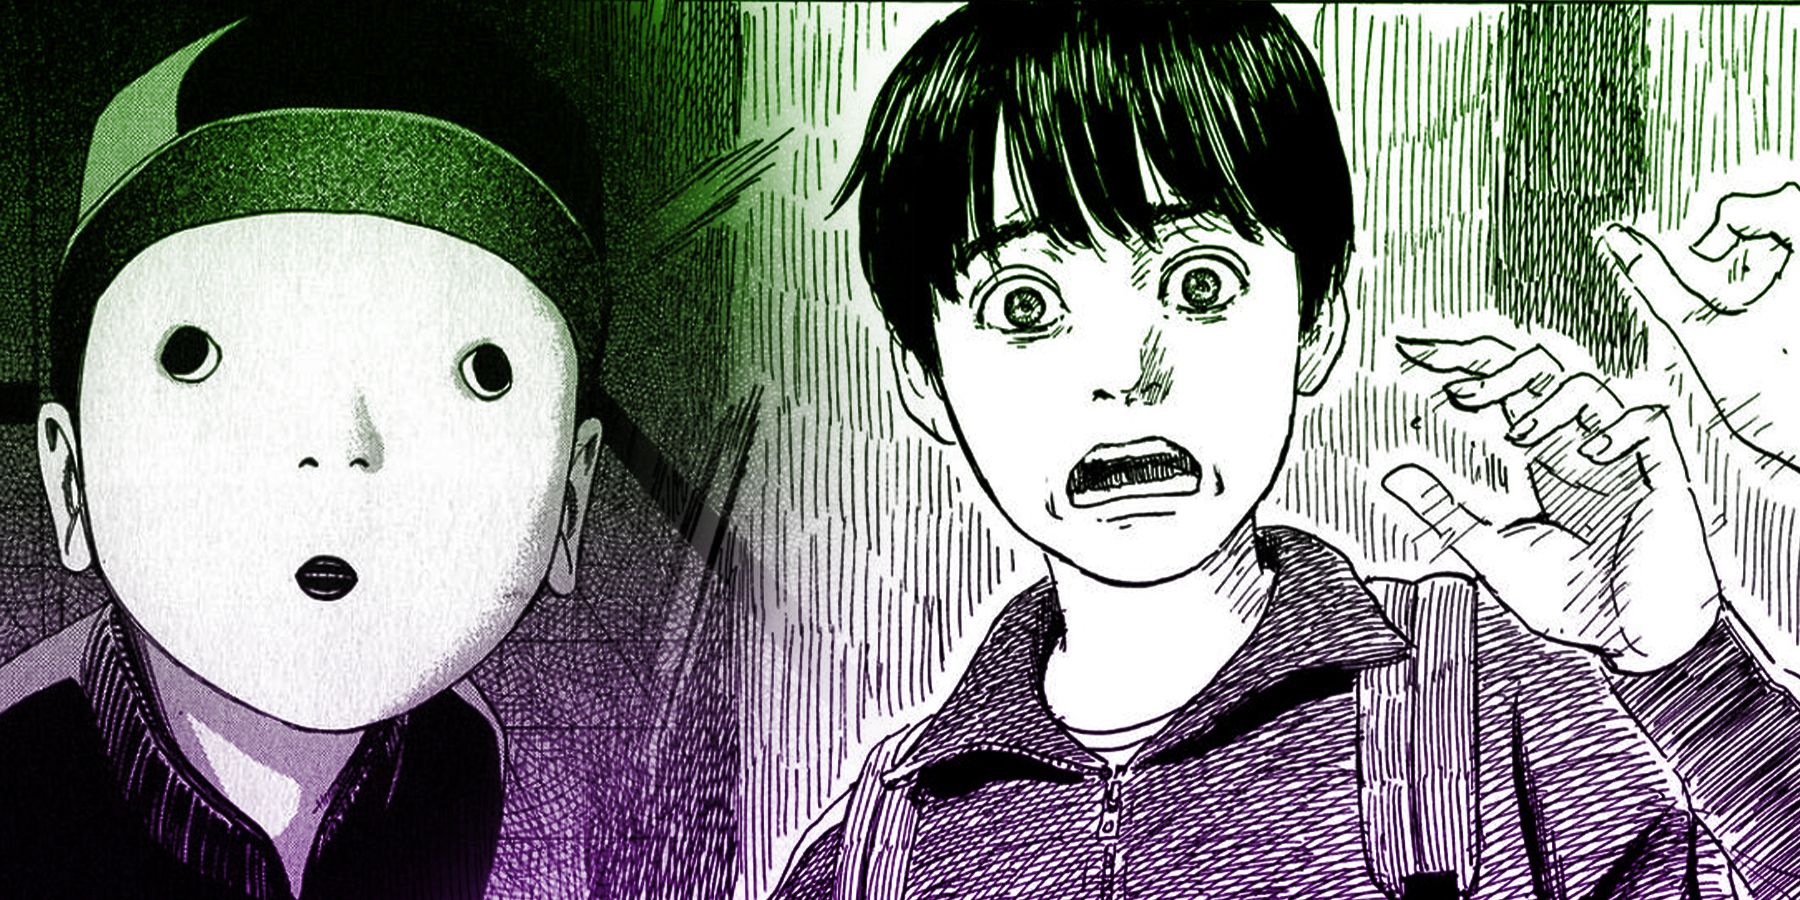 Horror And Manga Fans—Watch For Upcoming, Chilling Anime